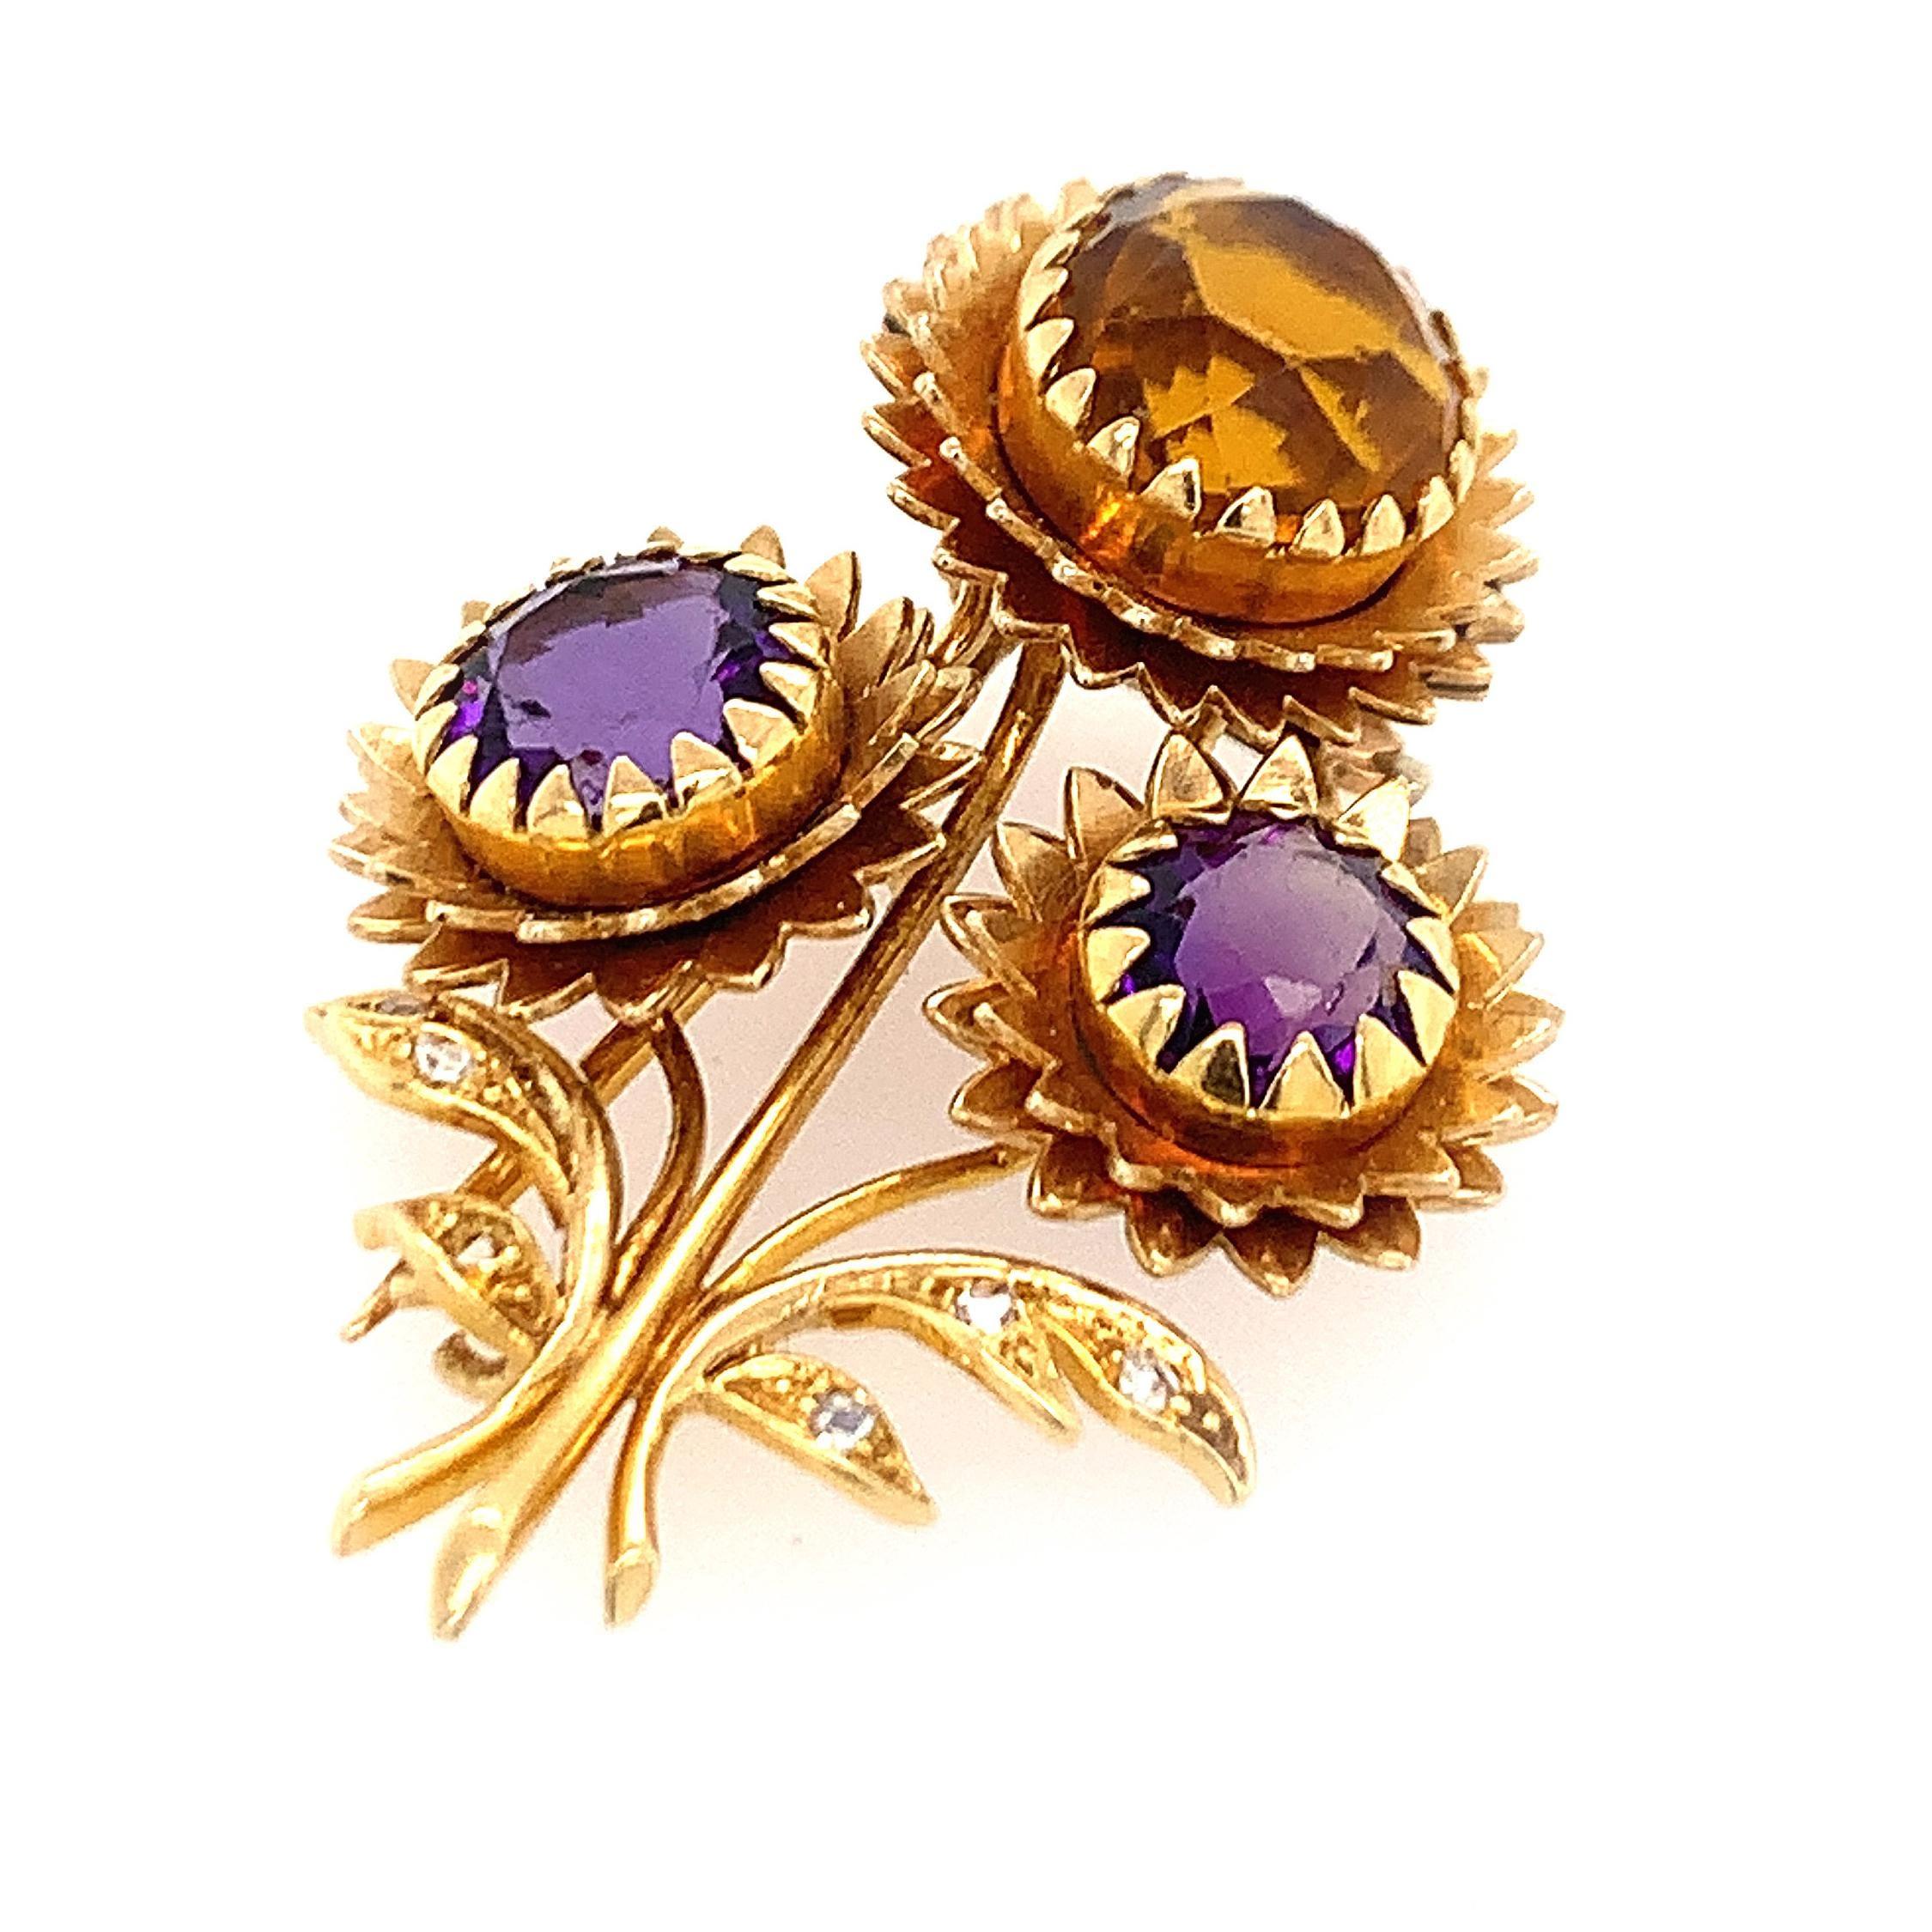 18K Y/gold sunflower pin, with two amethyst and one citrine and rose cut diamonds (one small diamomd missing will be replaced upon purchase. signed Marchak Paris 23683 and French hallmarks, pin meausres 1 1/2 x 1 1/8 inches, weight 8.5 dwt.